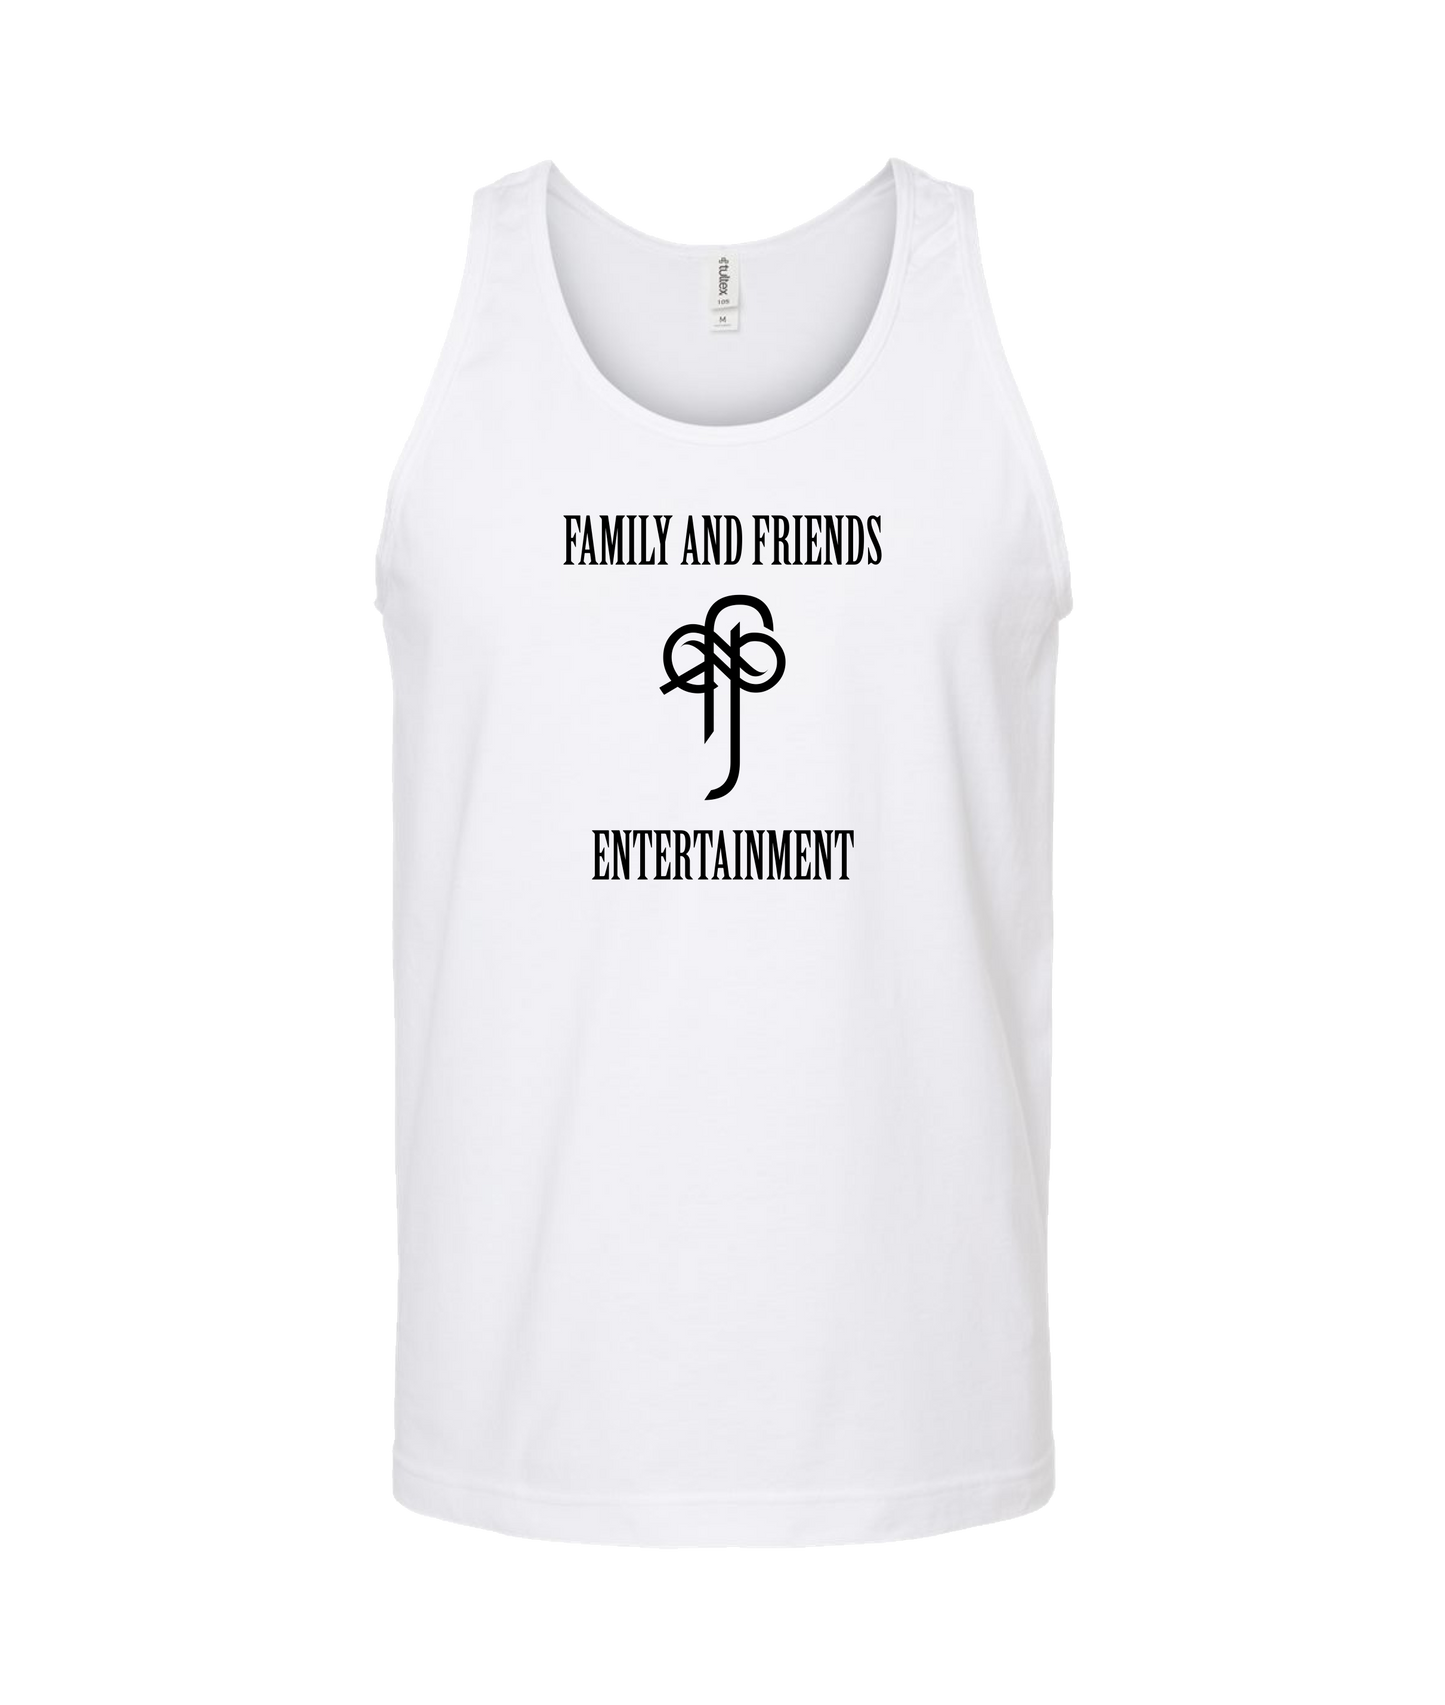 Sincrawford - Family and Friends Ent.  - White Tank Top